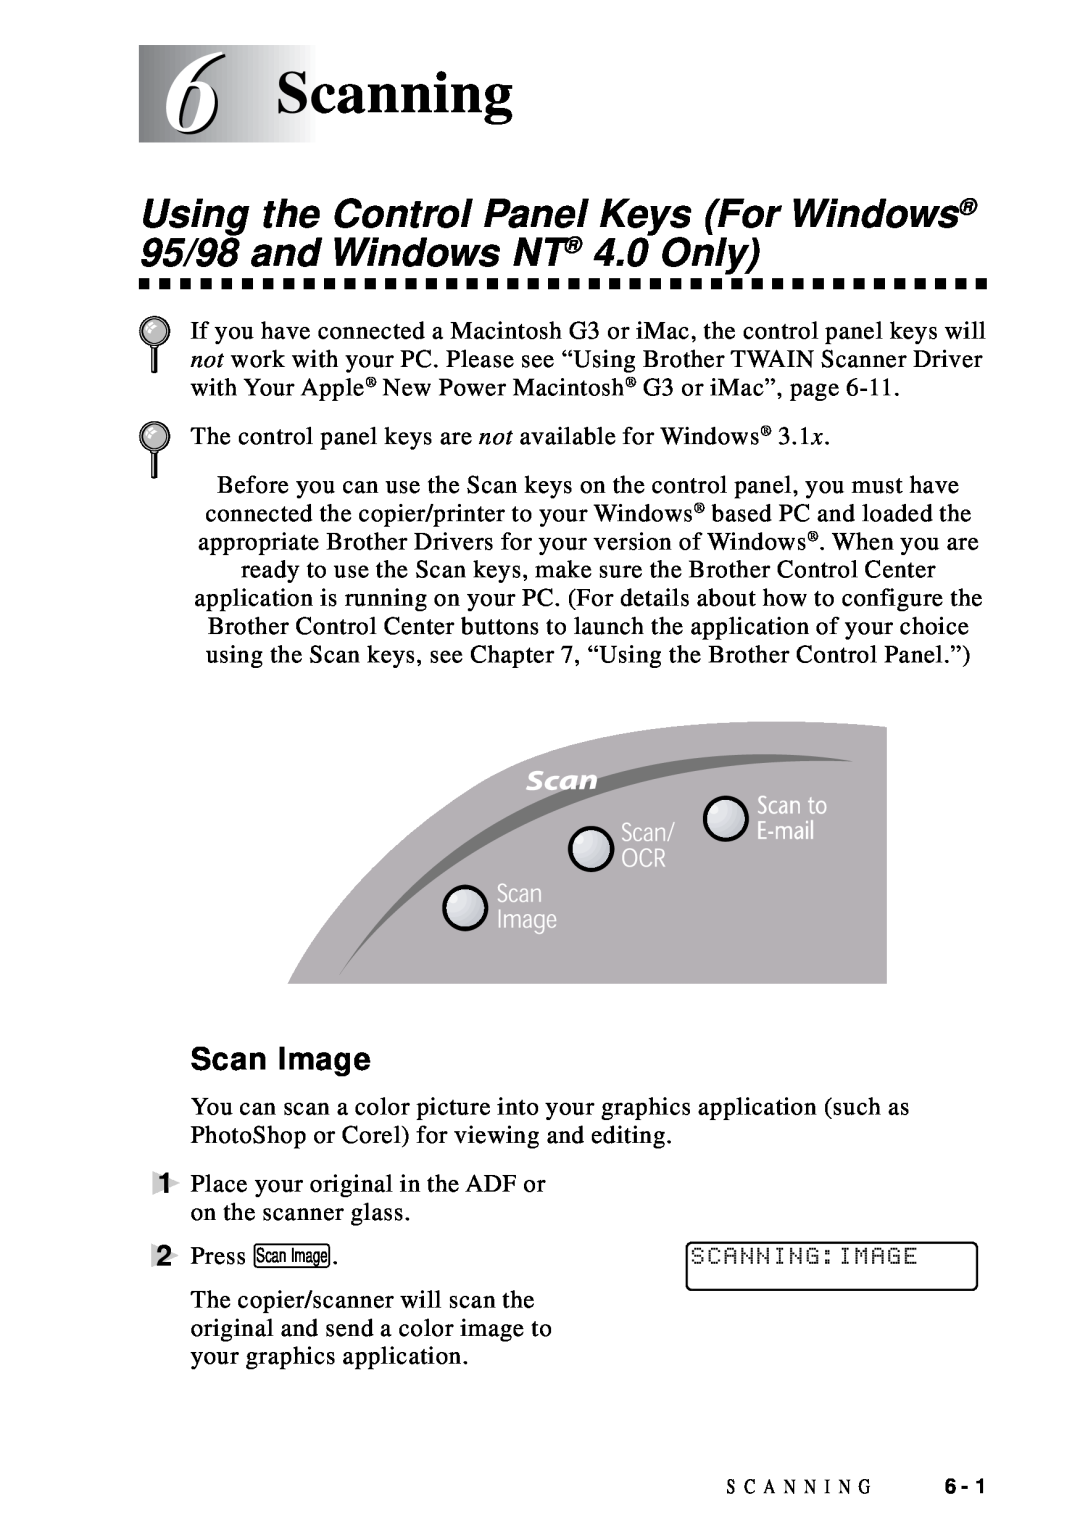 Brother DCP1200 manual 6Scanning, Scan Image 